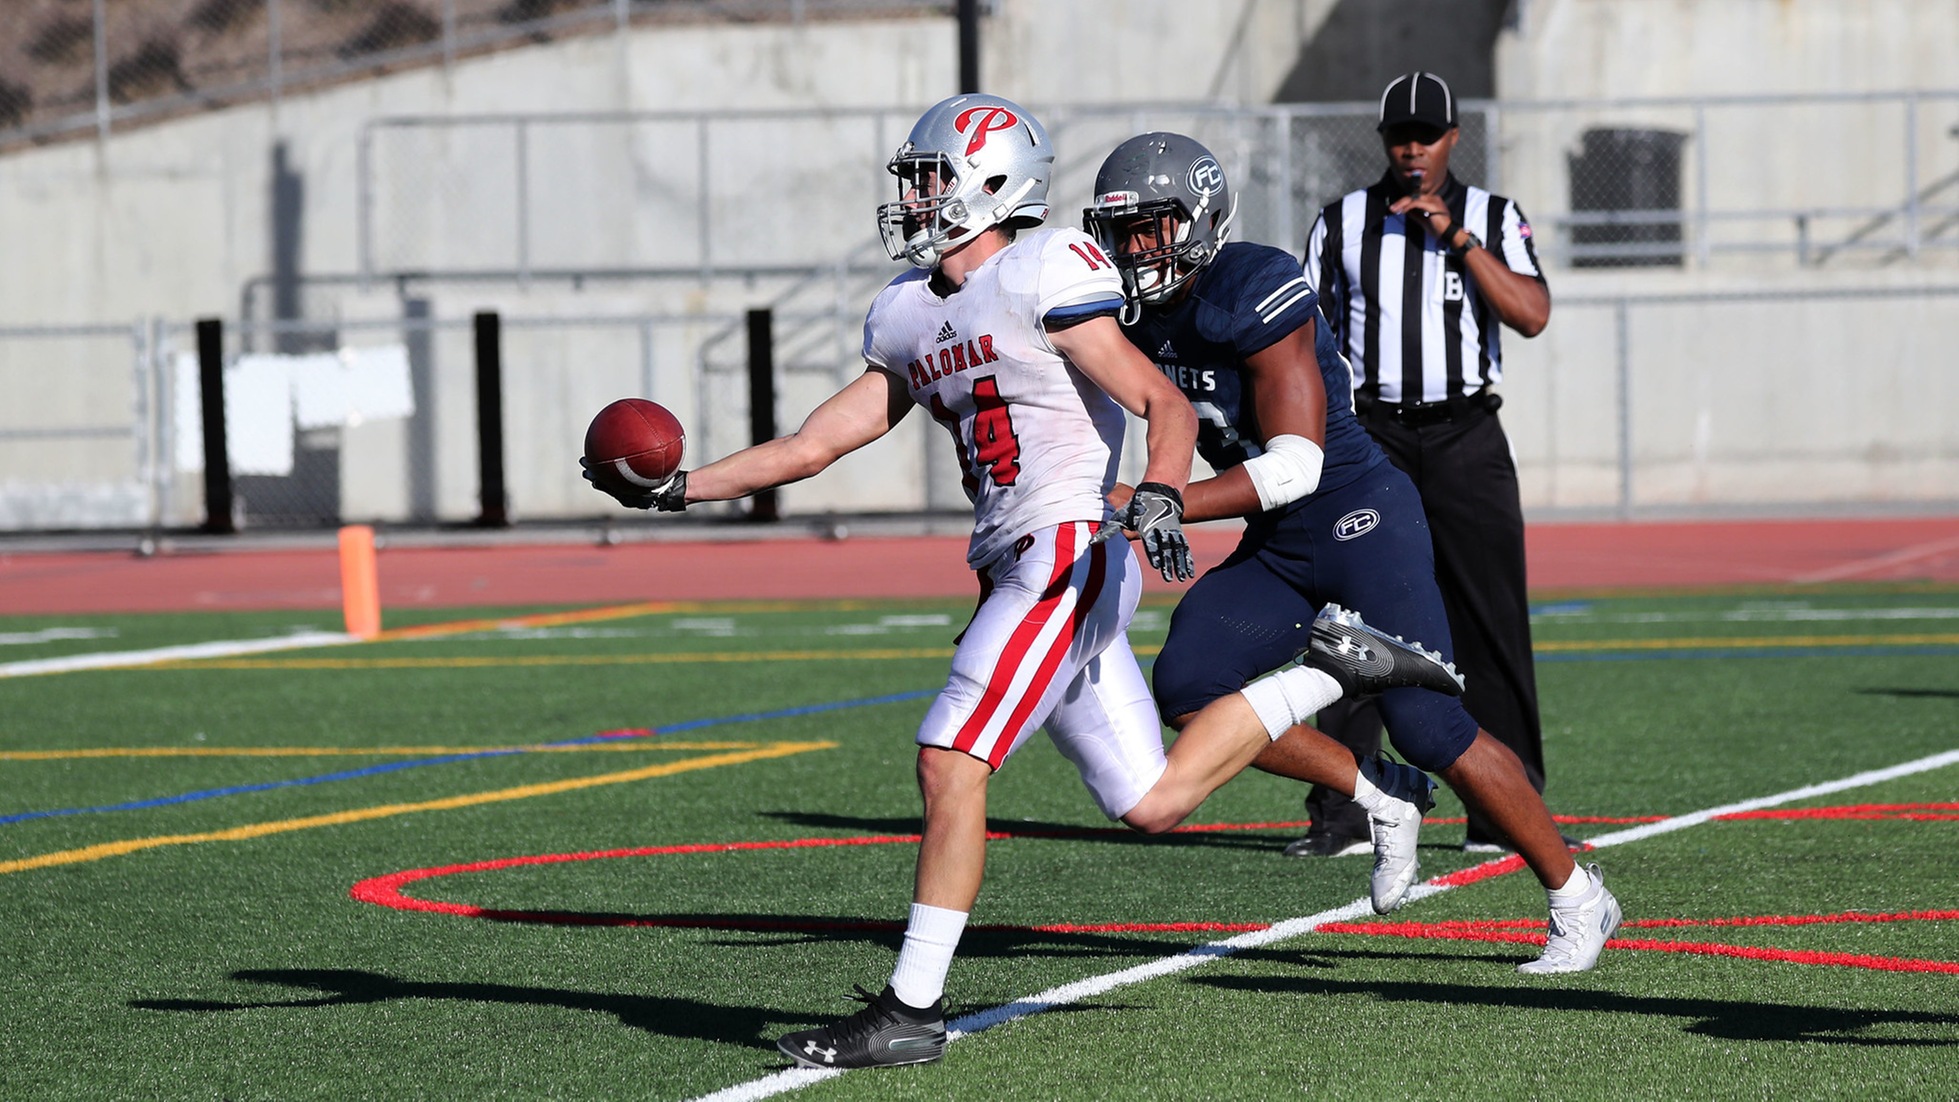 Johnny Armentrout had 183 receiving yards last week against Fullerton. Photo by Hugh Cox.